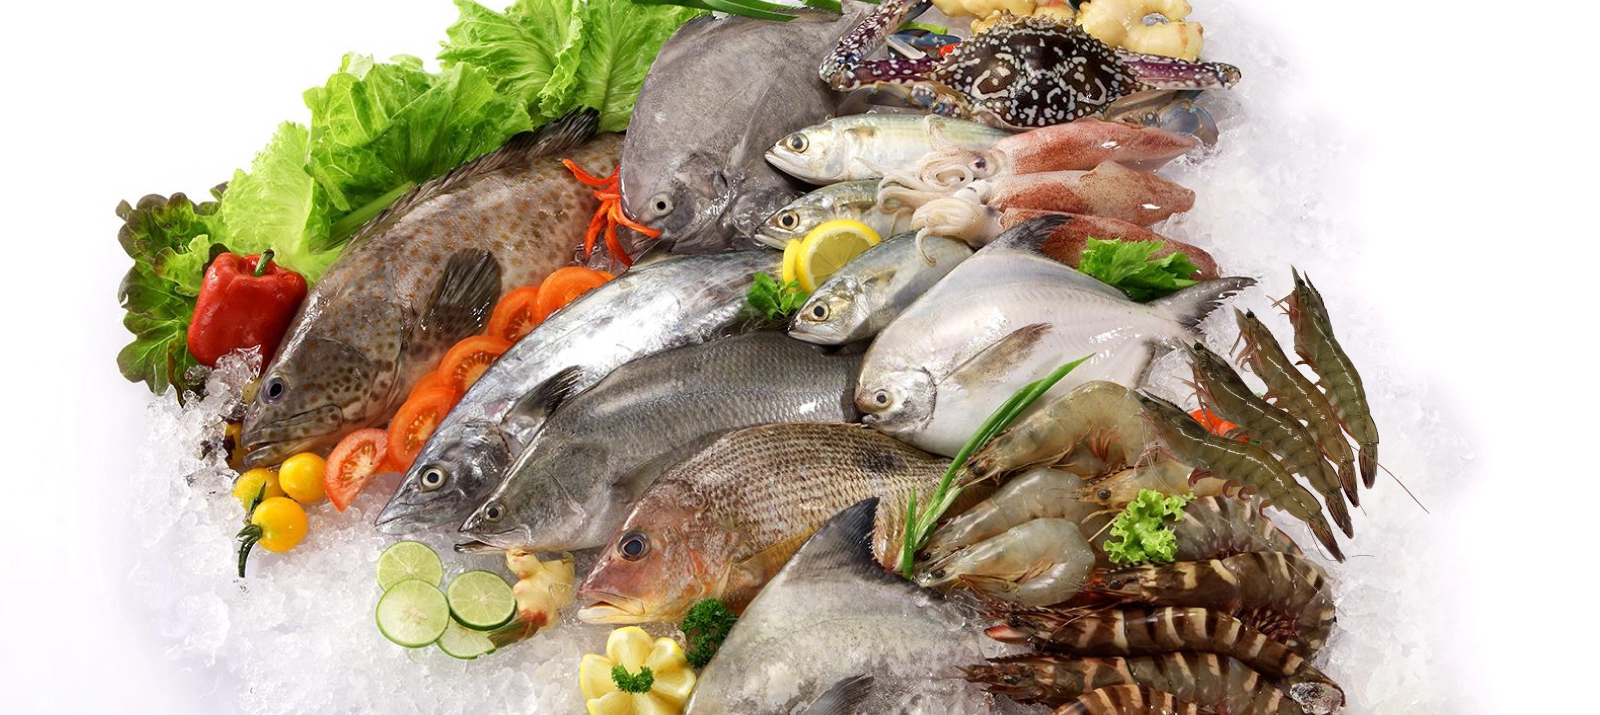 Frozen Seafood Processing KL, Halal Seafood Supplier Selangor, Steamboat  Ingredients Supply Malaysia ~ HAI KEE HUNG SDN BHD